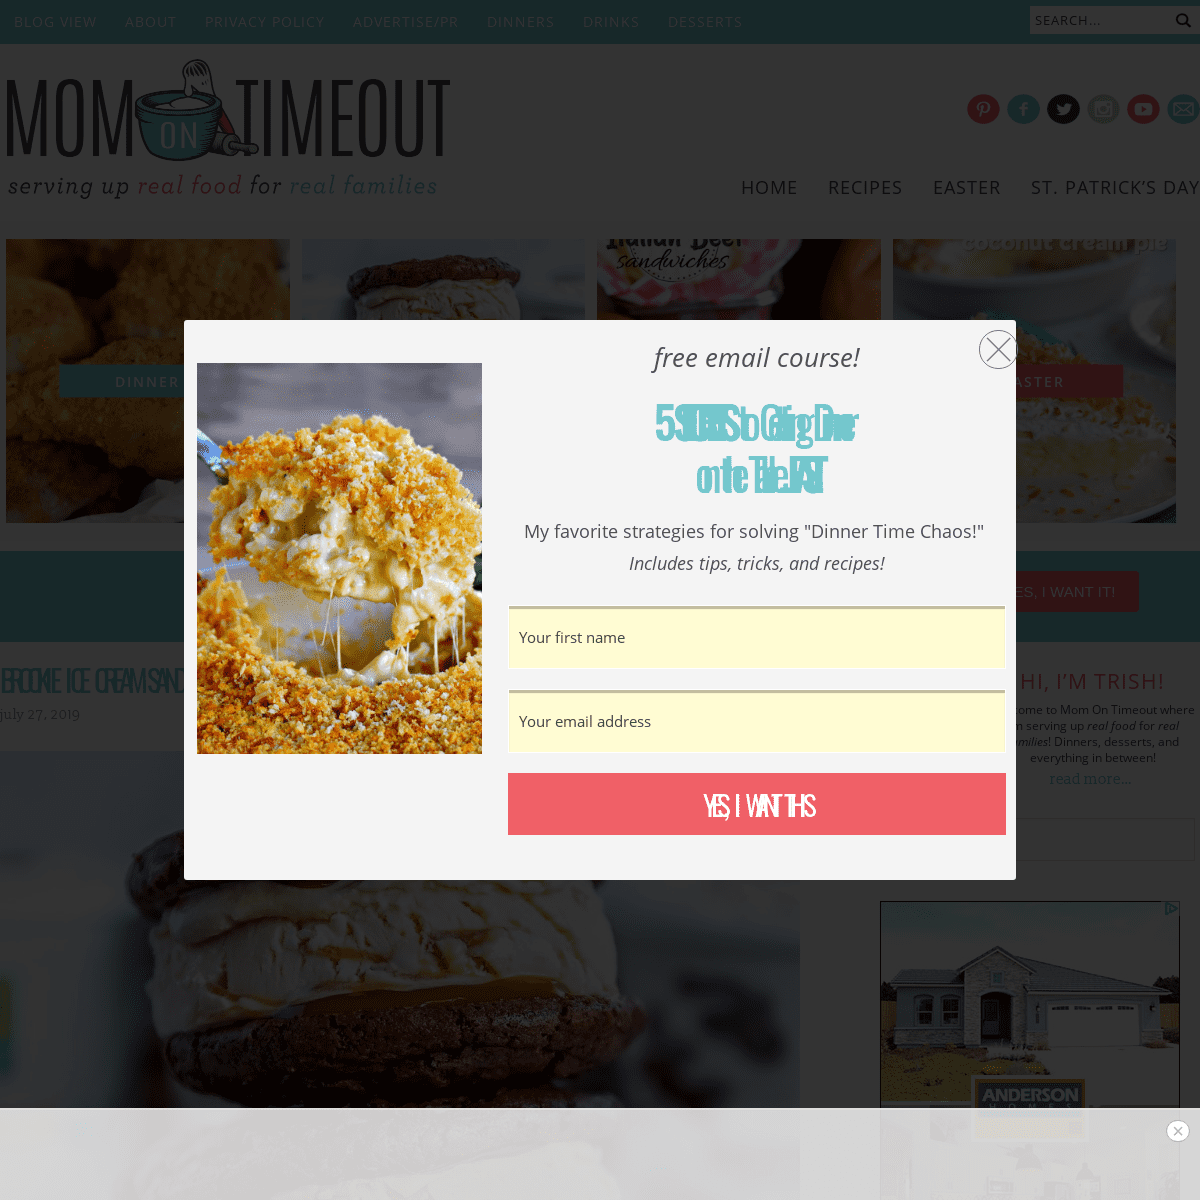 Mom On Timeout - Serving up real food for real families!